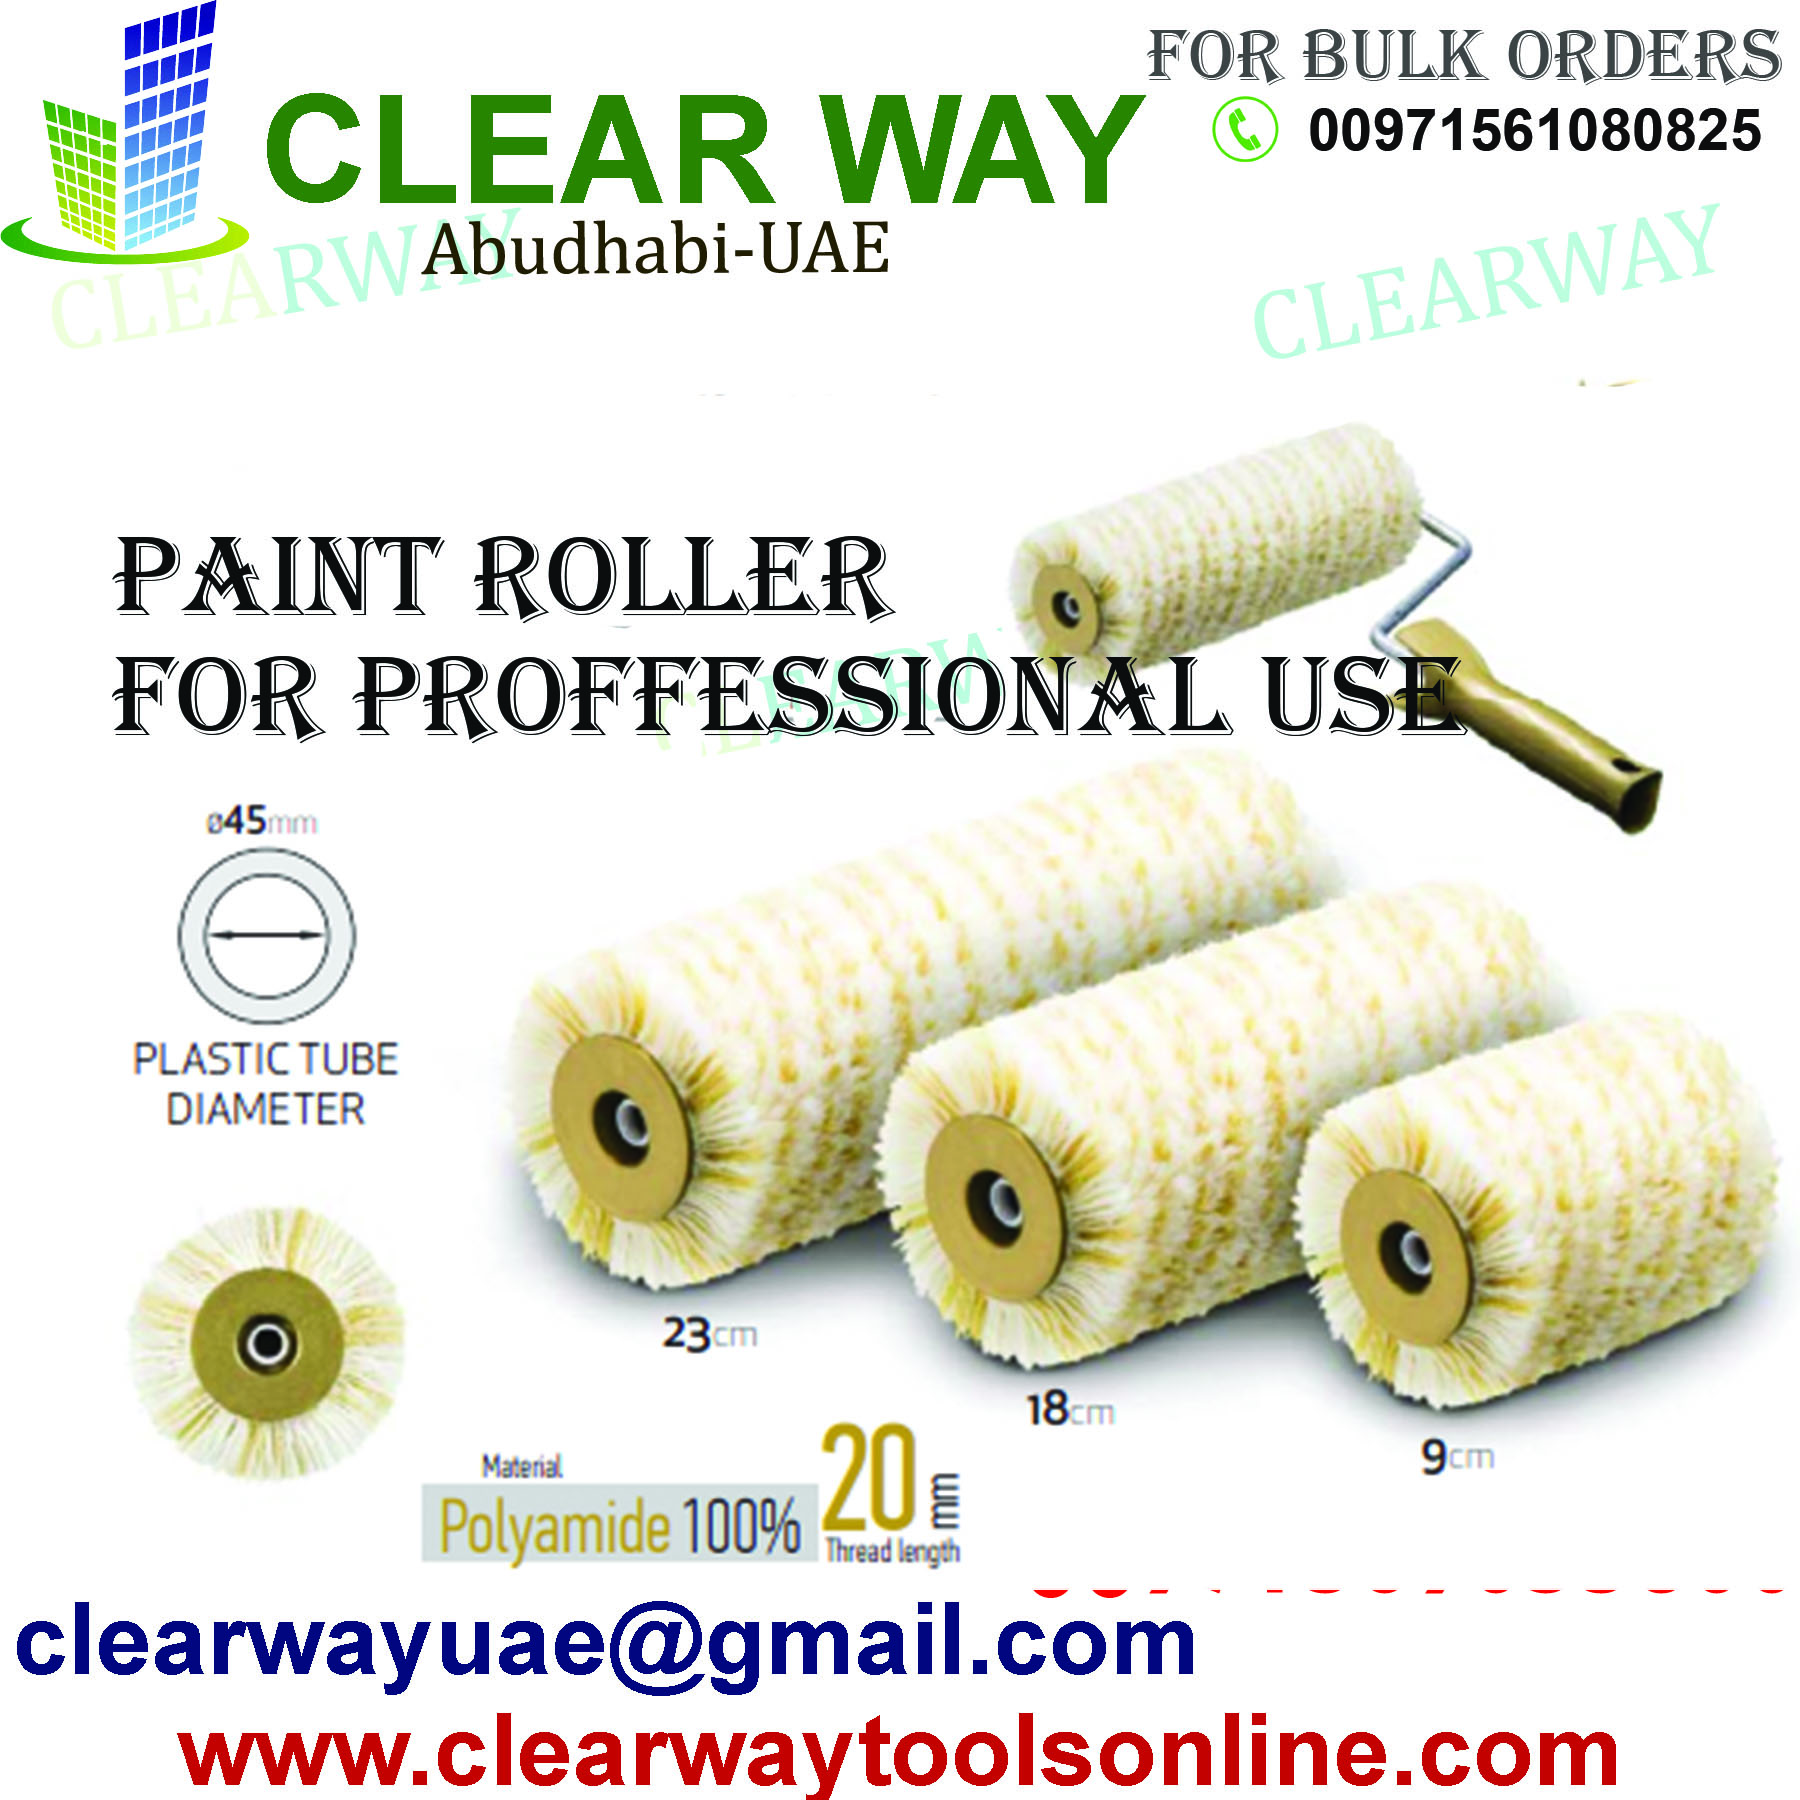 PAINT ROLLER FOR PROFFESSIONAL USAGE DEALER IN MUSSAFAH ABUDHABI UAE